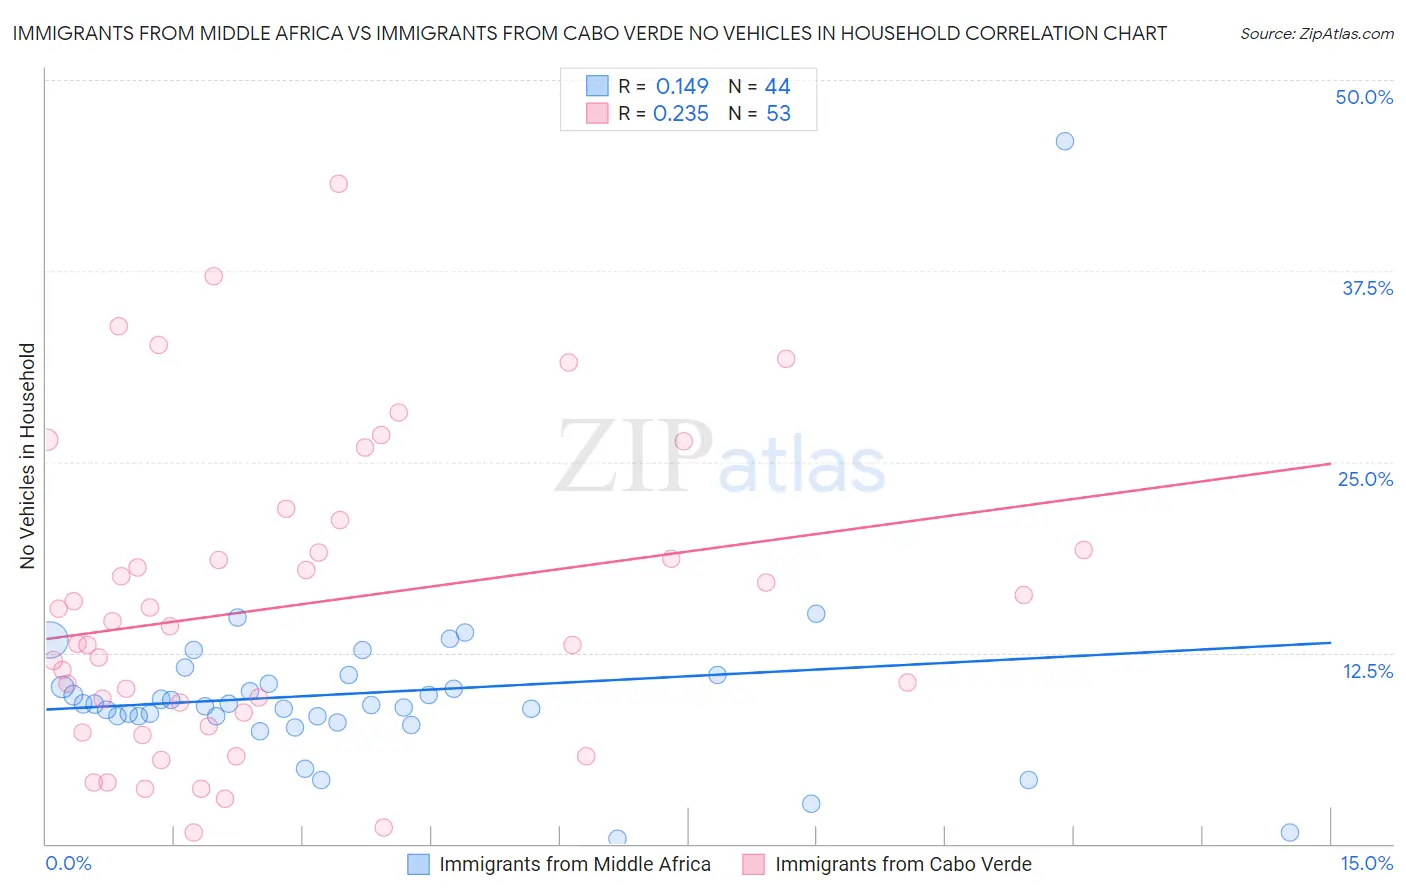 Immigrants from Middle Africa vs Immigrants from Cabo Verde No Vehicles in Household